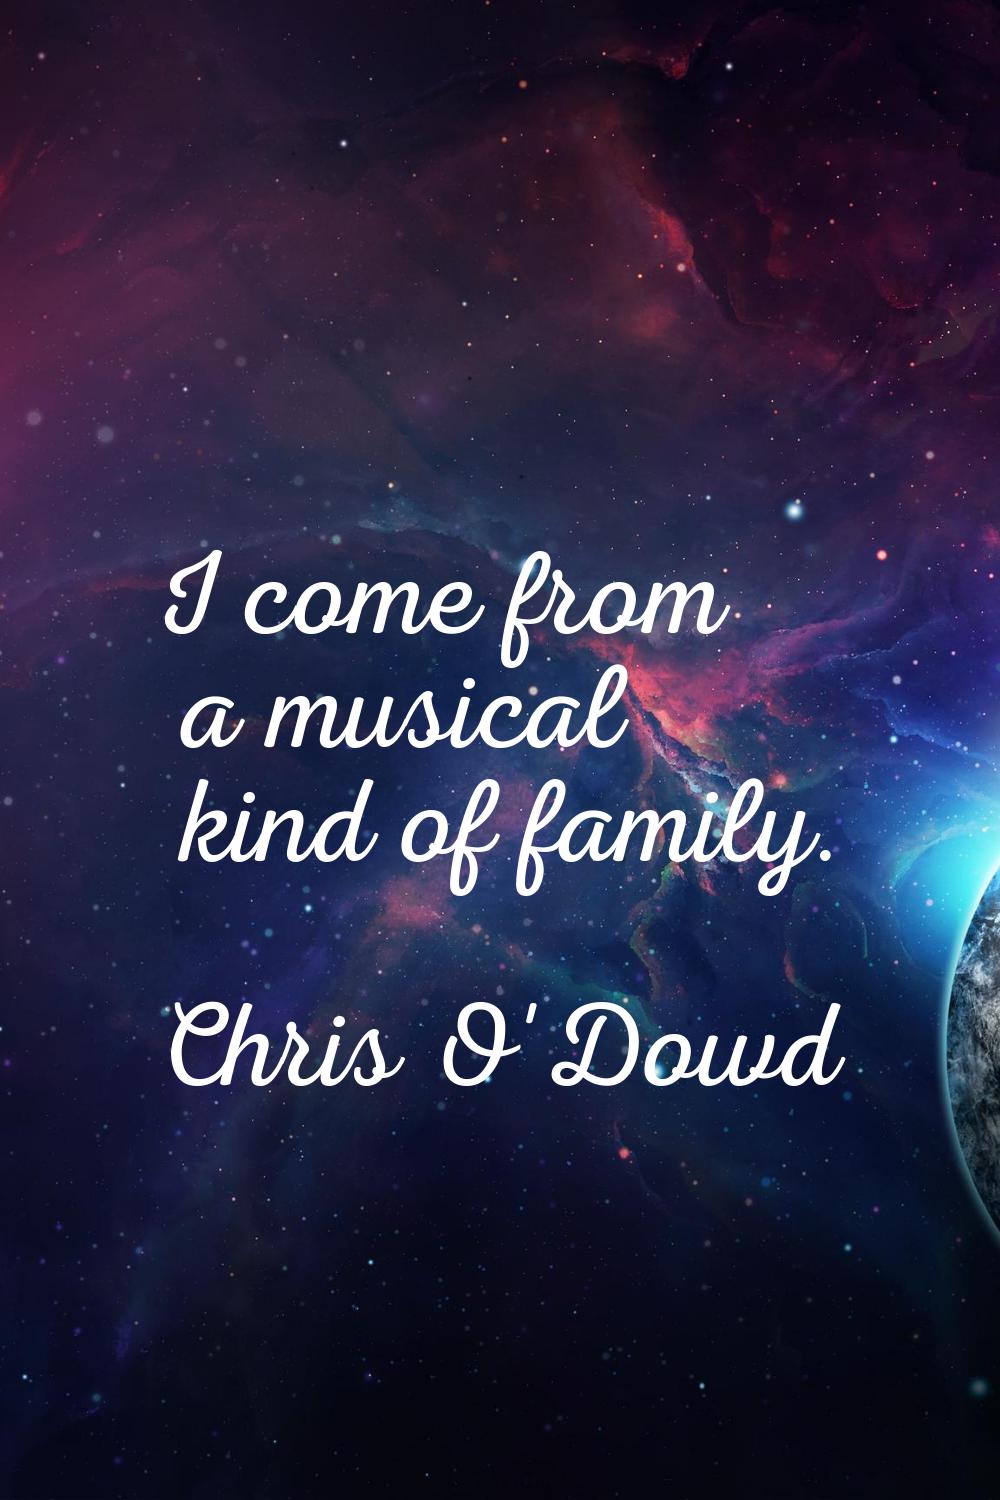 I come from a musical kind of family.